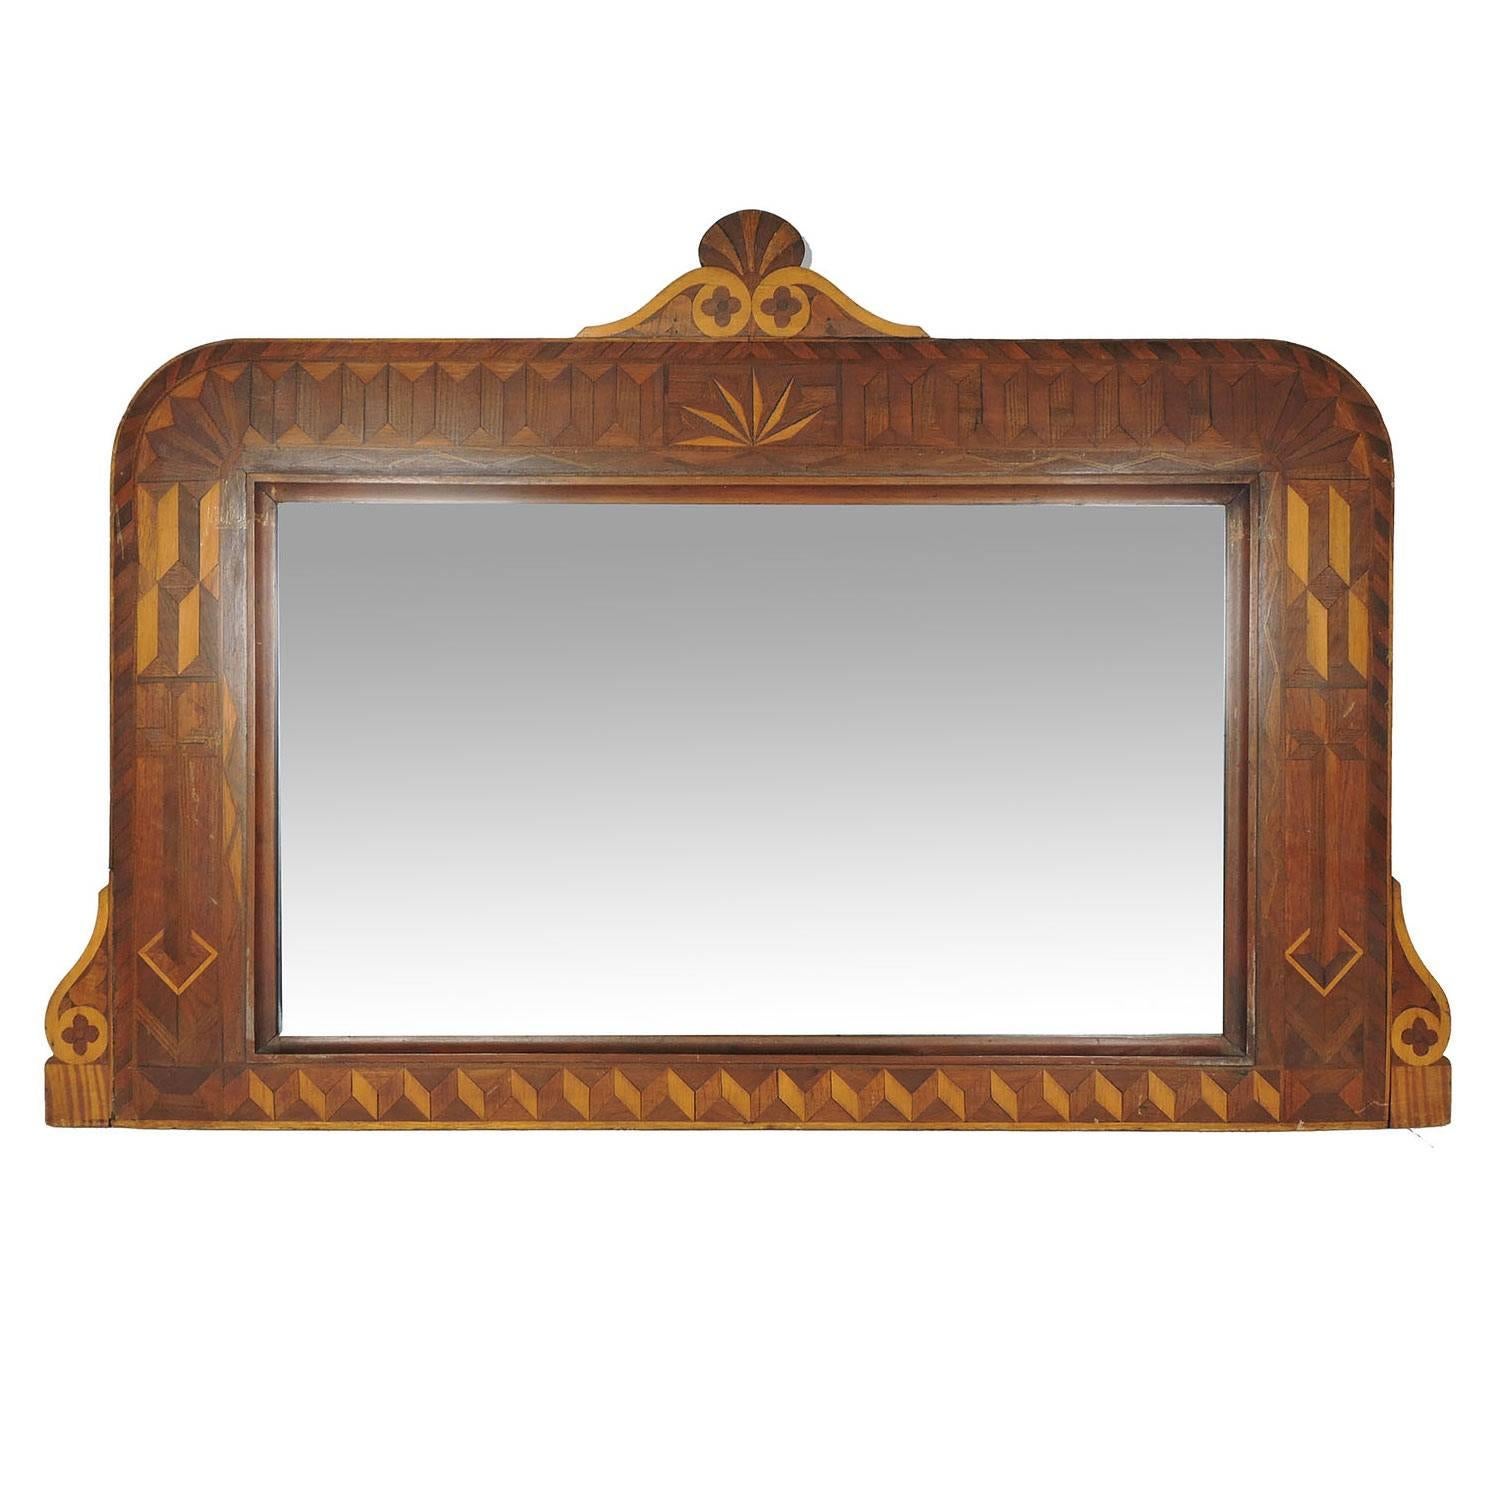 19th Century Folk Art Marquetry and Parquetry Inlaid Mahogany Mirror For Sale